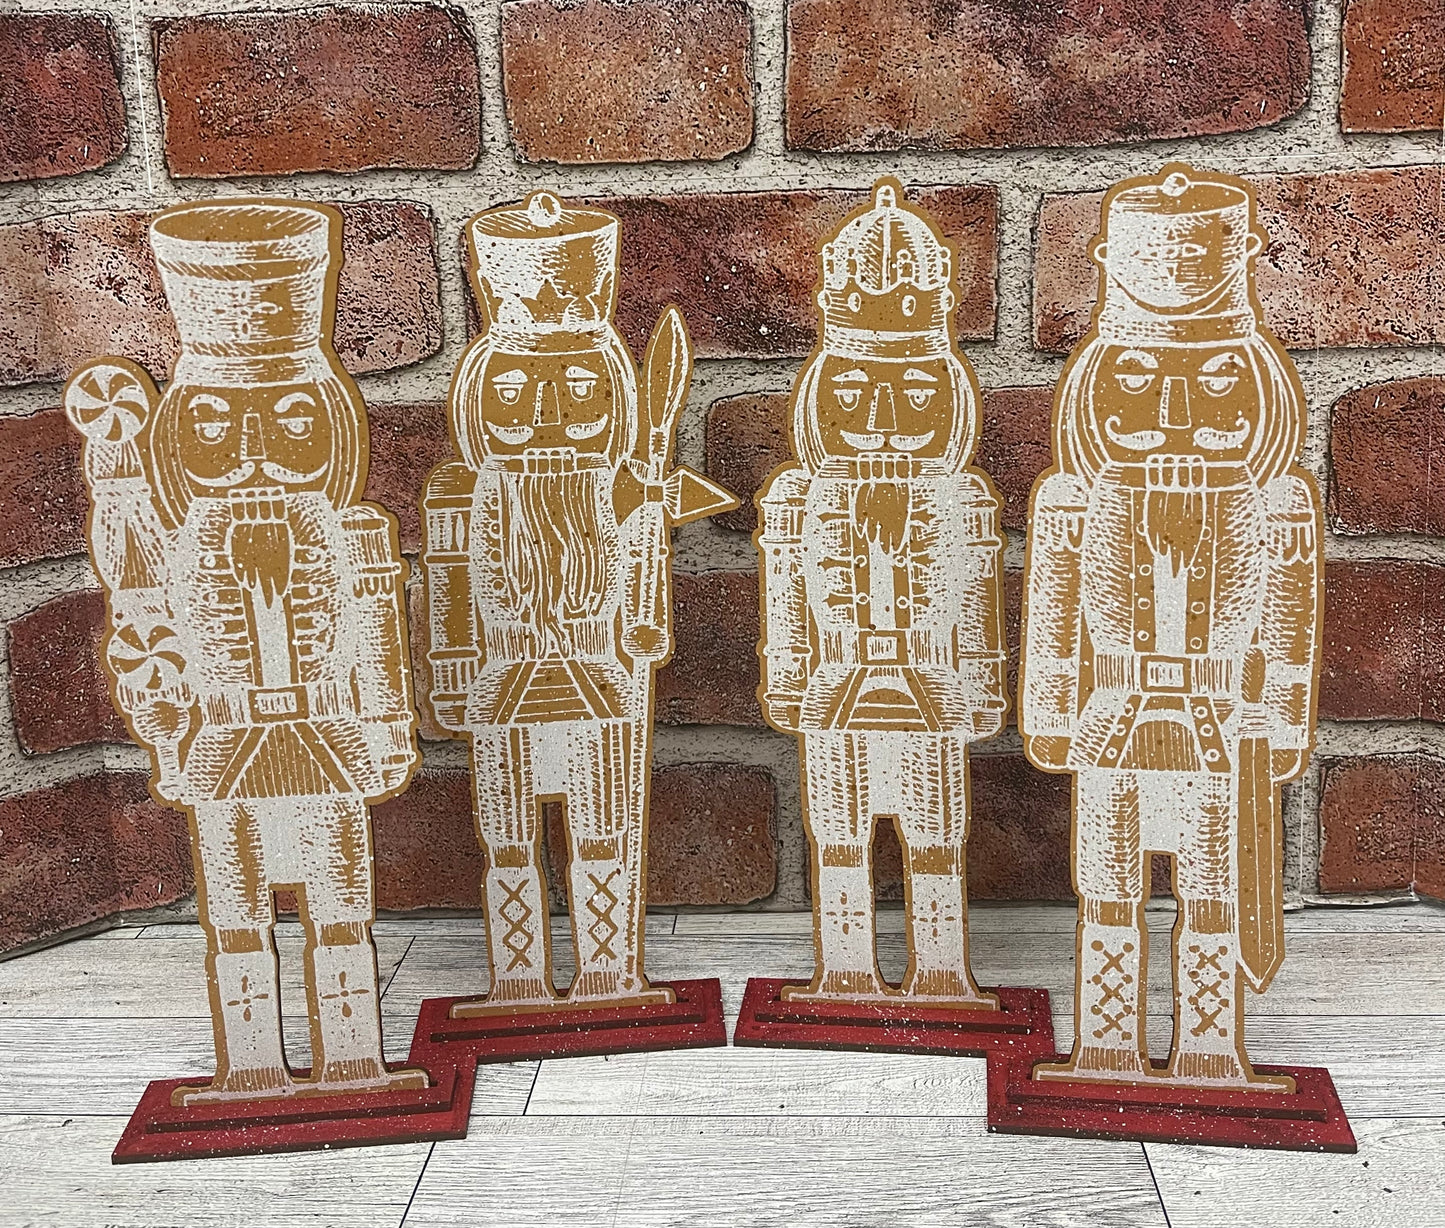 4 sets of Nutcracker stands - wood pieces only, unpainted wood cutouts, ready for you to paint